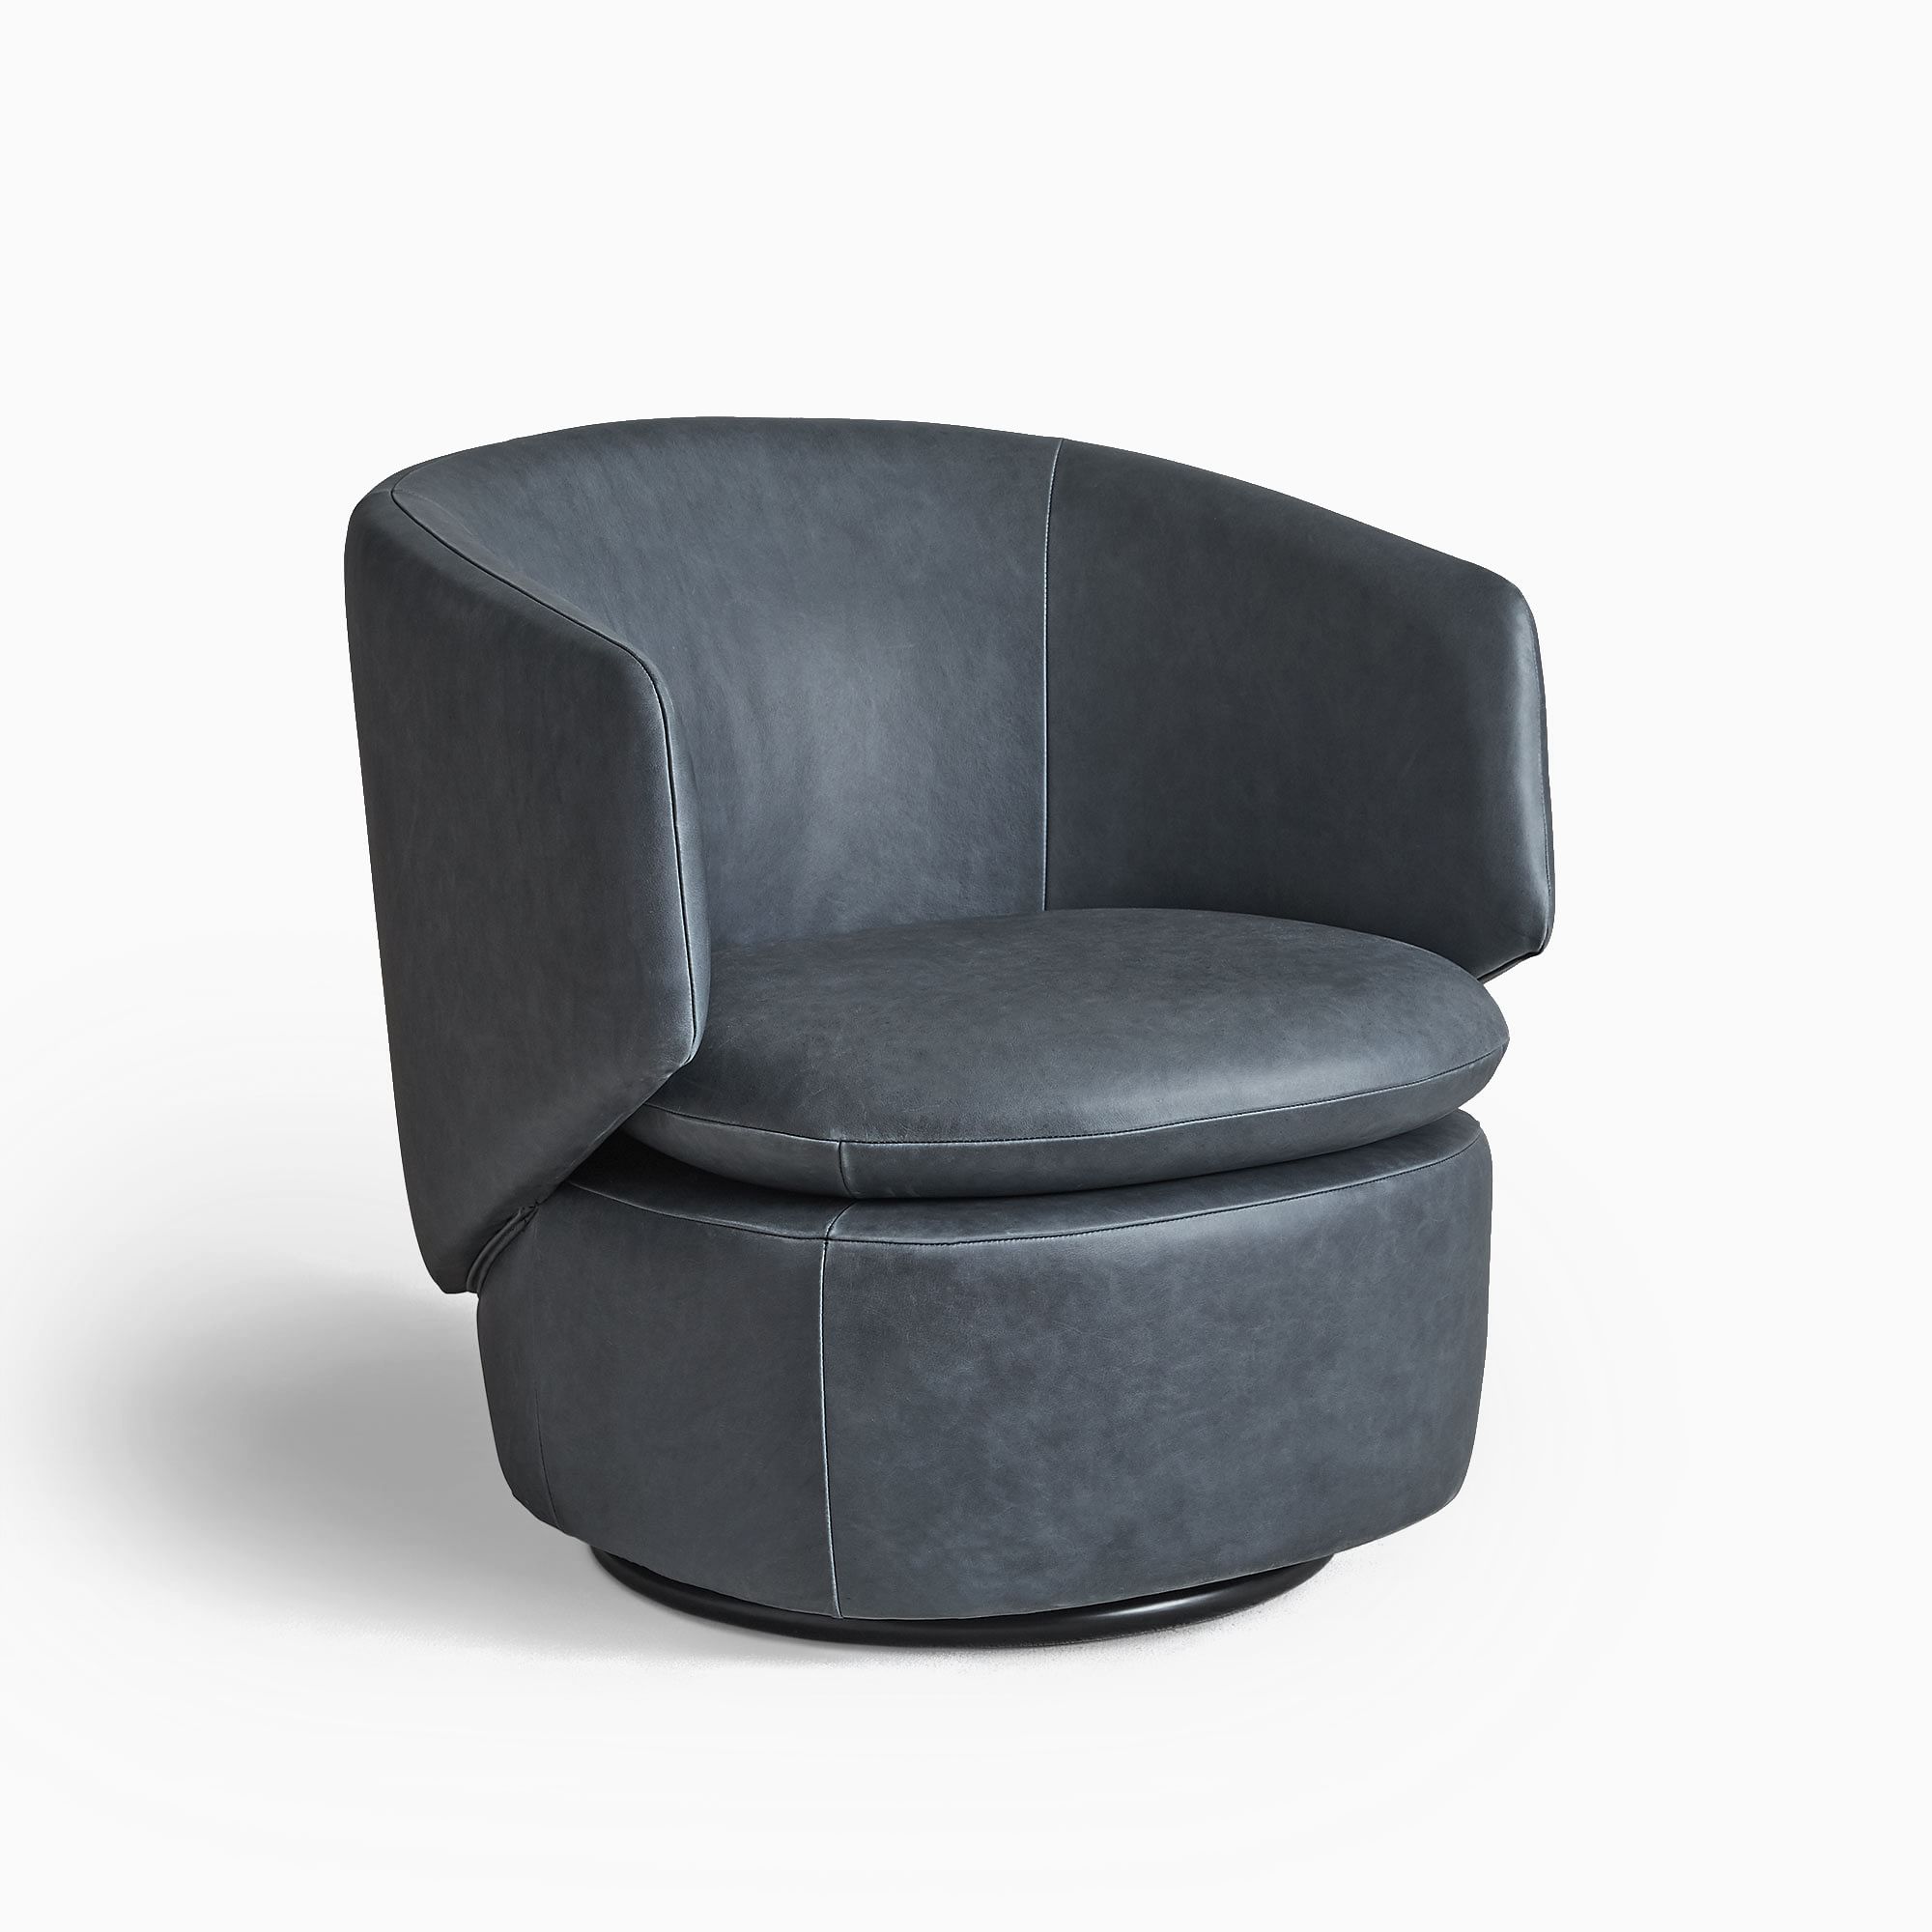 Crescent Leather Swivel Chair | West Elm